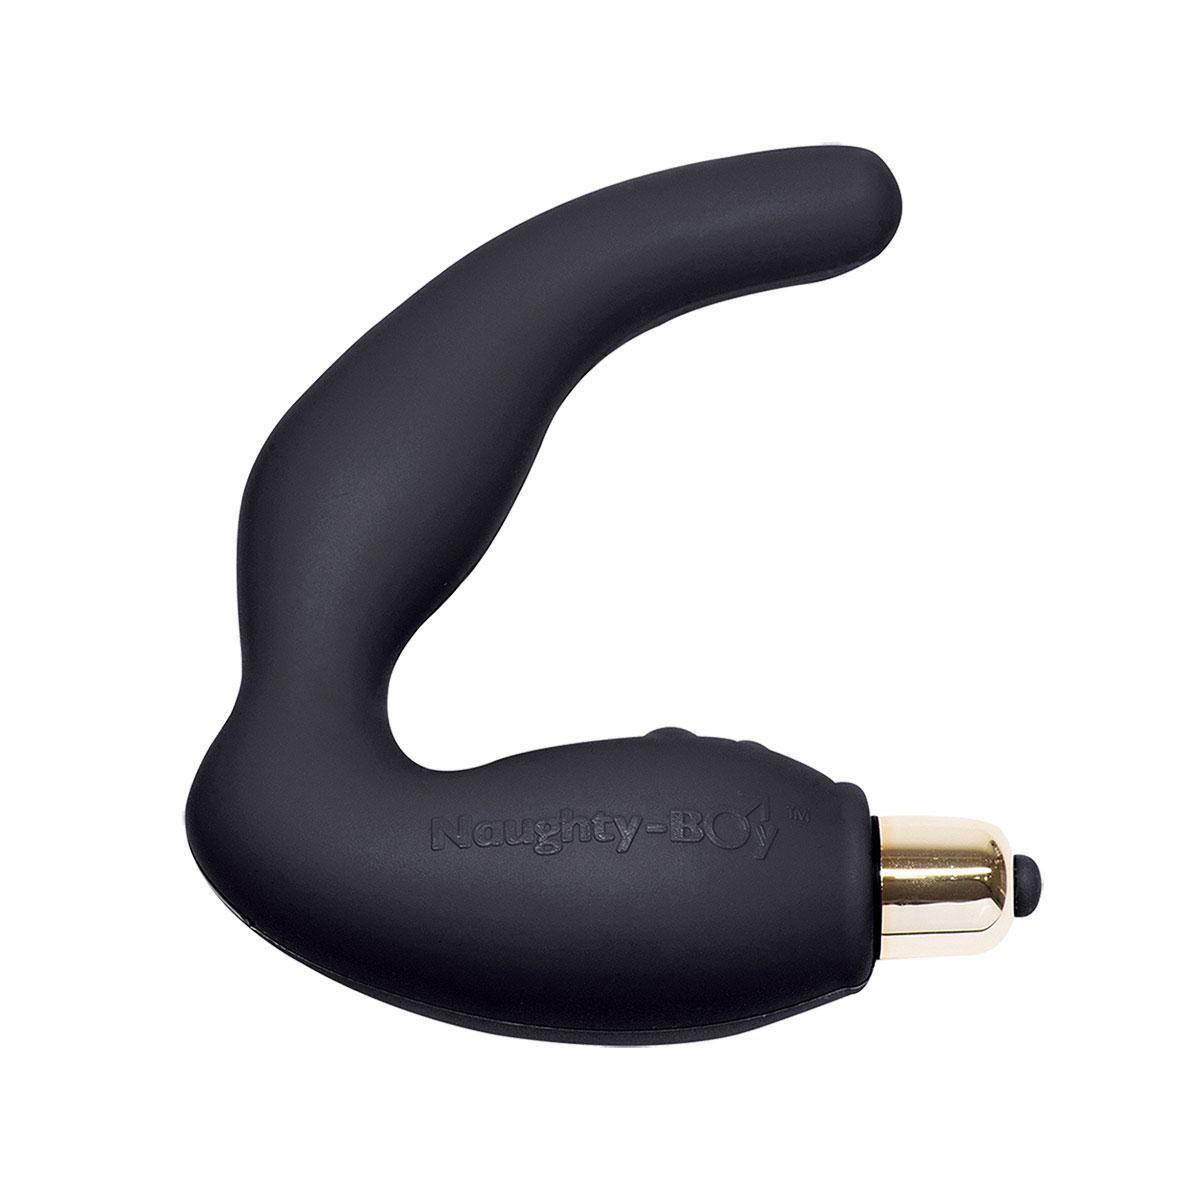 Naughty Boy Prostate Massager - Buy At Luxury Toy X - Free 3-Day Shipping